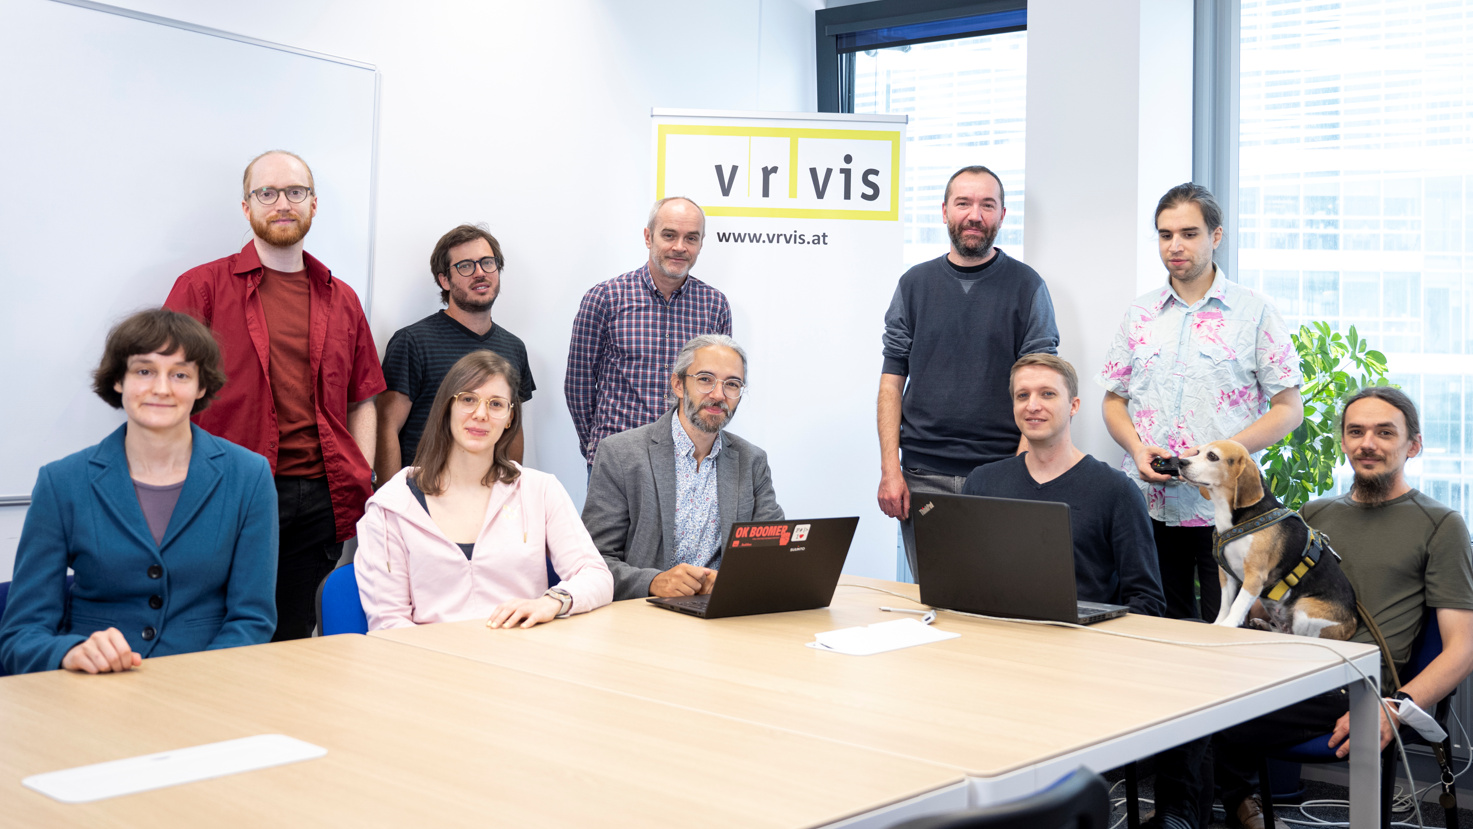 The researchers of the GeoSMAQ Group in front of the VRVis banner.